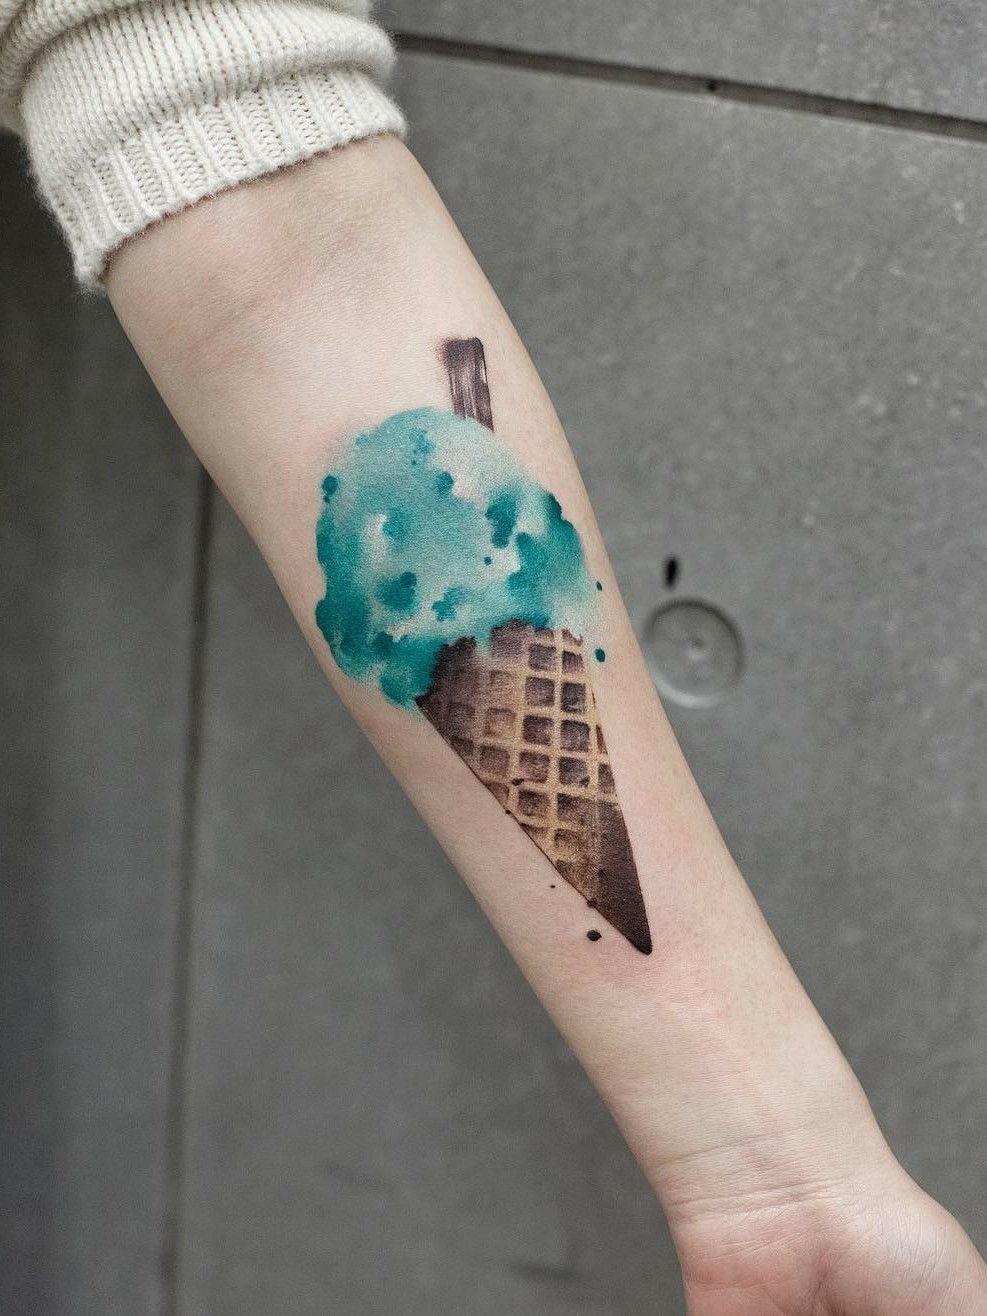 Buy ICE CREAM TATTOO 4x6 Full Color Print Online in India  Etsy